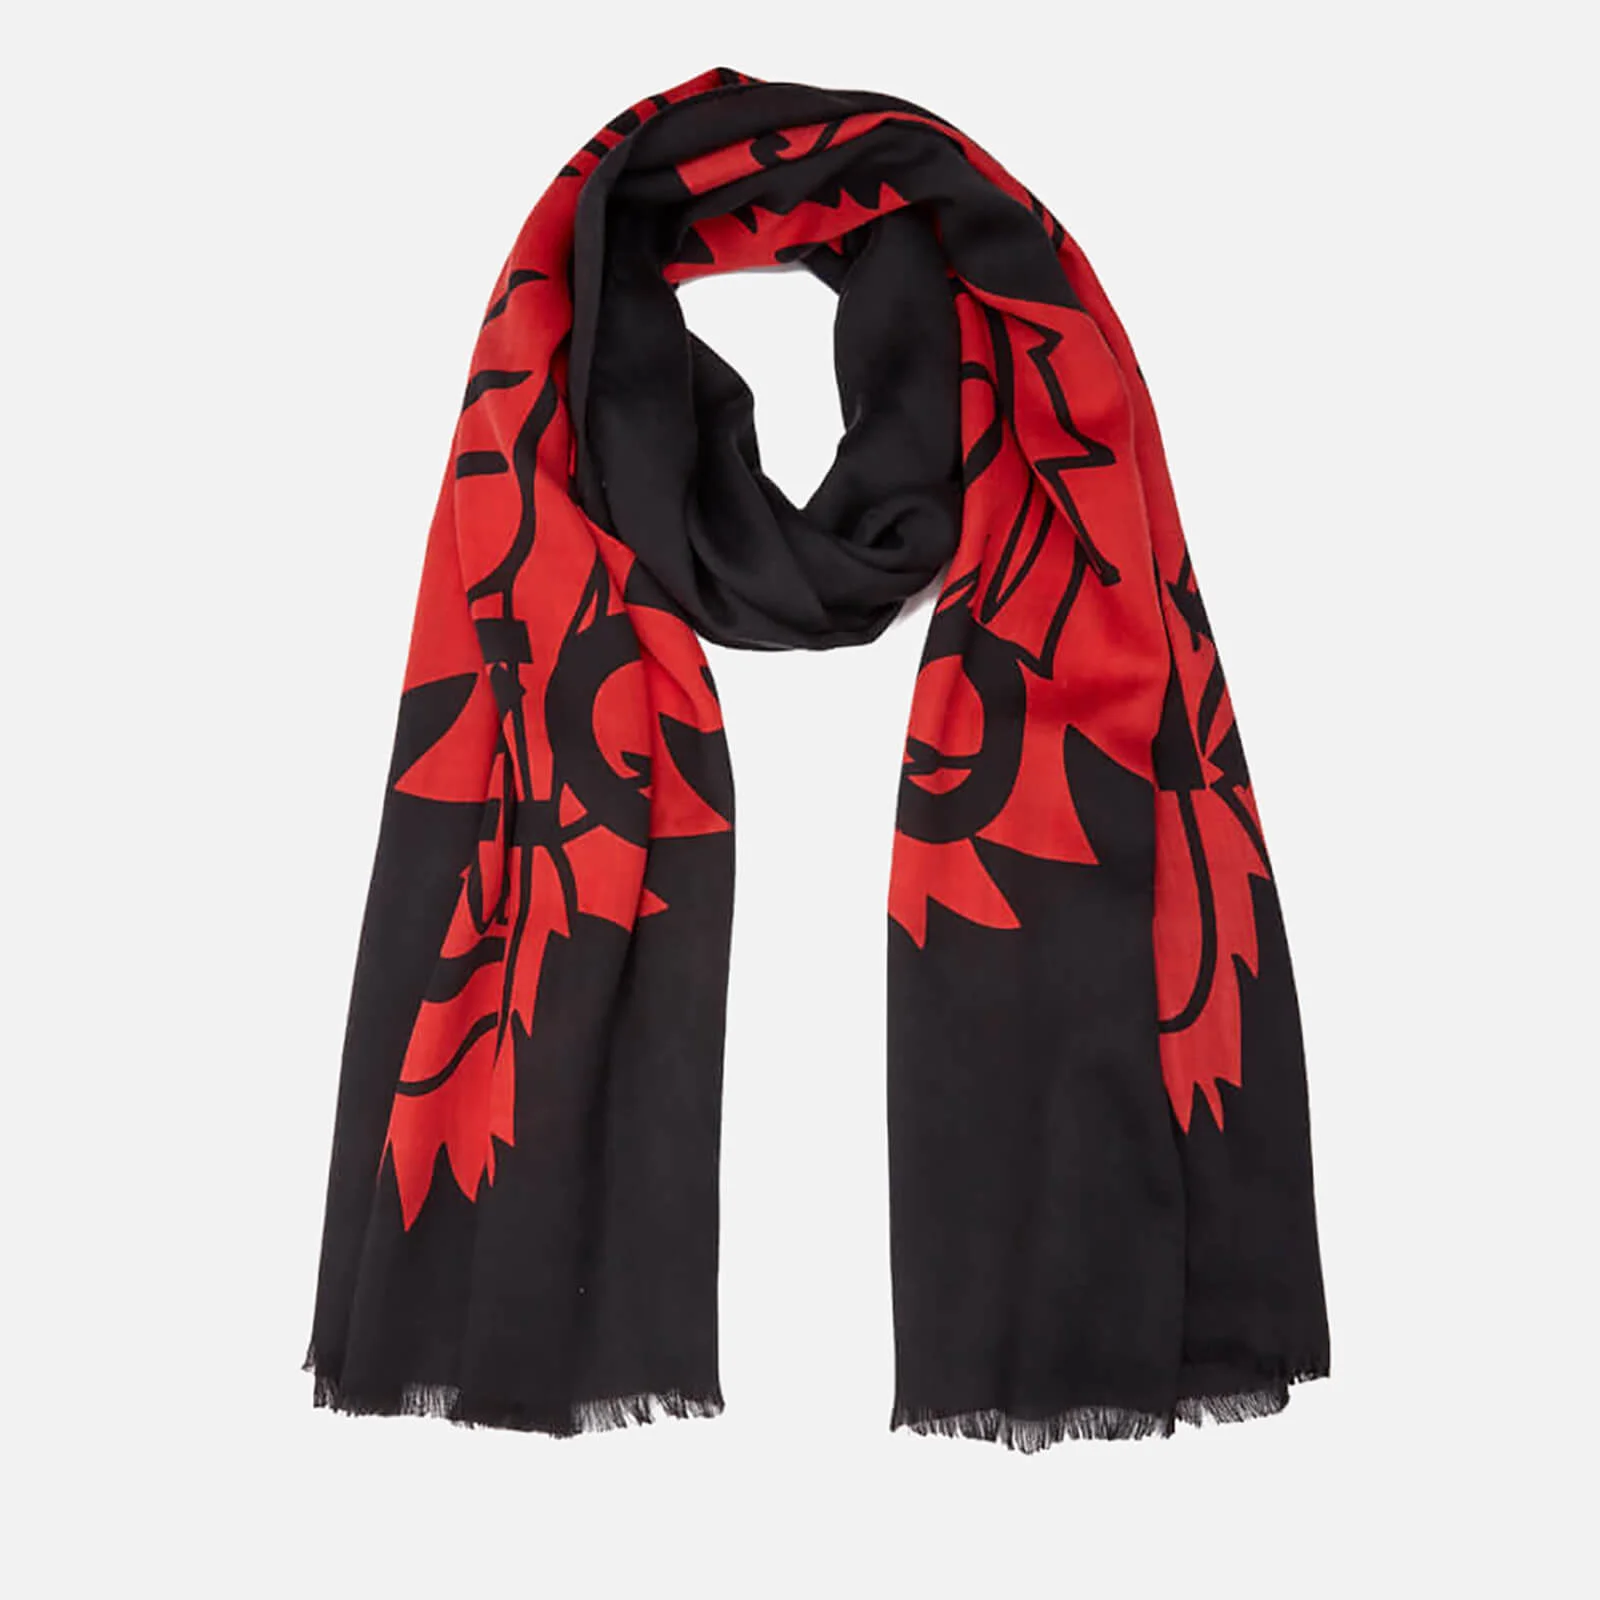 KENZO Women's Iconics Tiger Chest Scarf - Black/Red Image 1